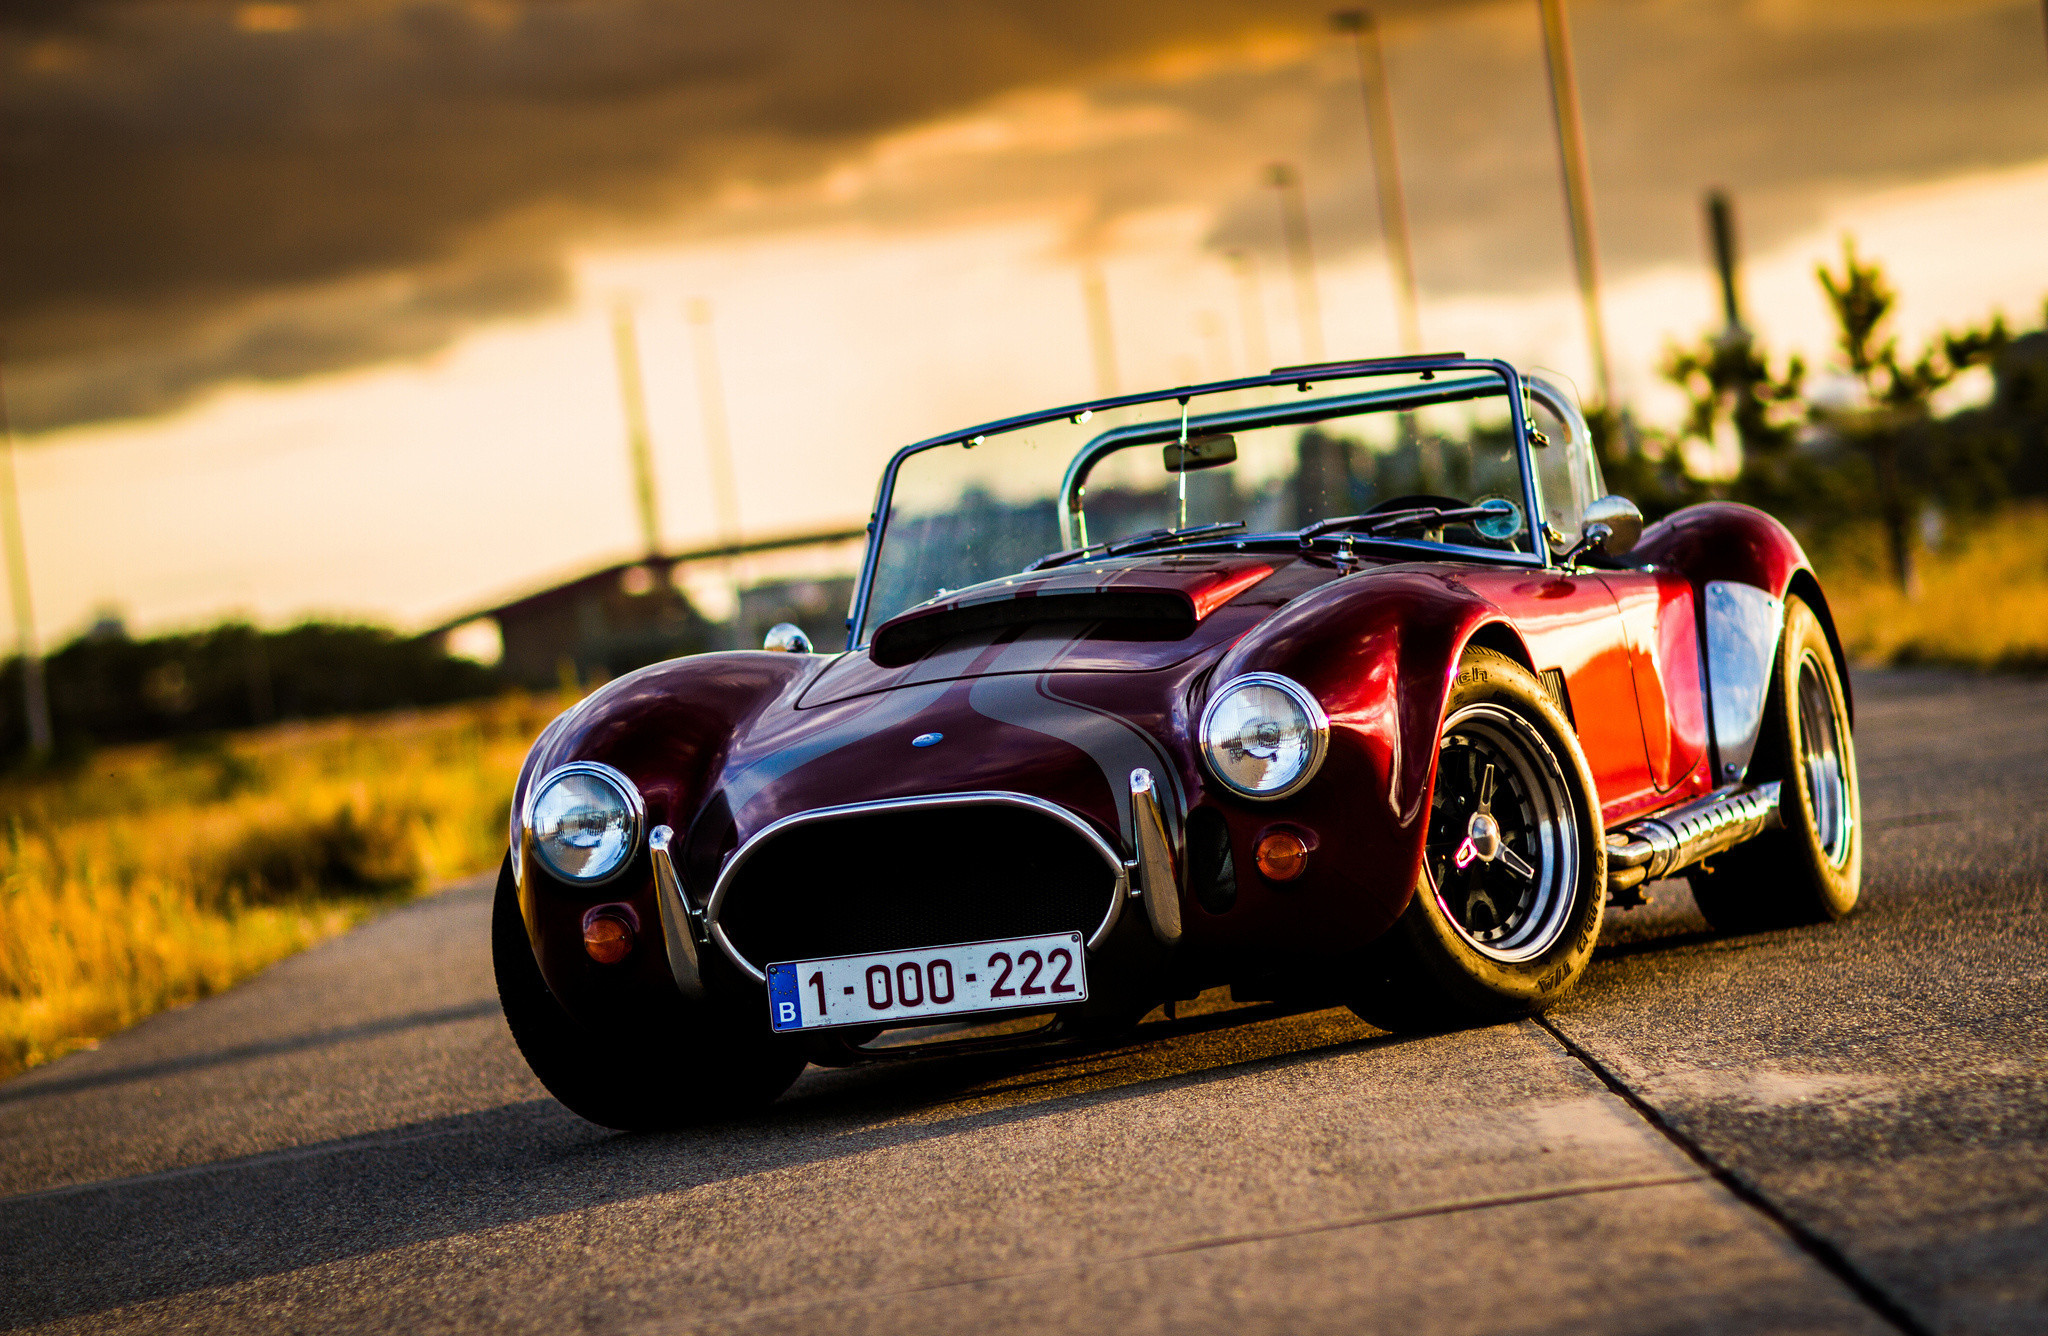 Classic Photos, Download The BEST Free Classic Stock Photos & HD Images